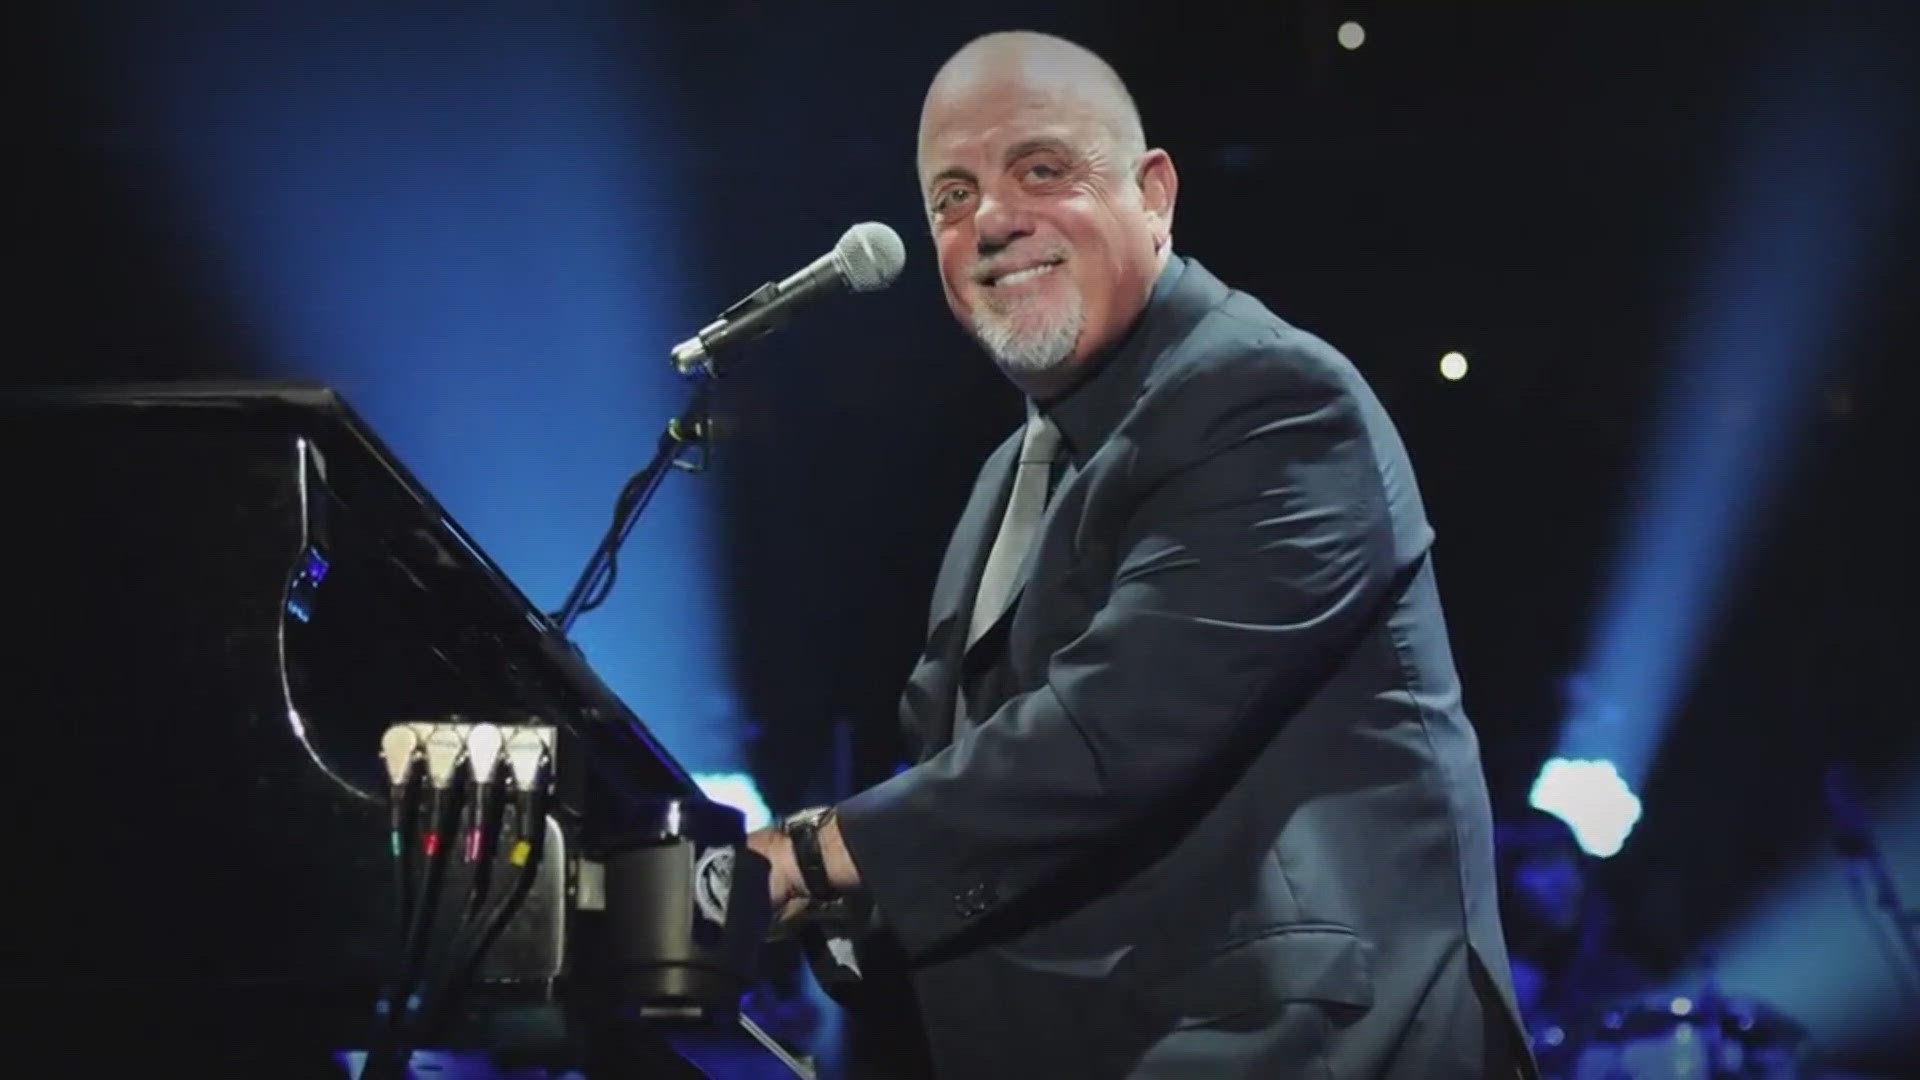 Billy Joel to make first Grammy appearance in 30 years